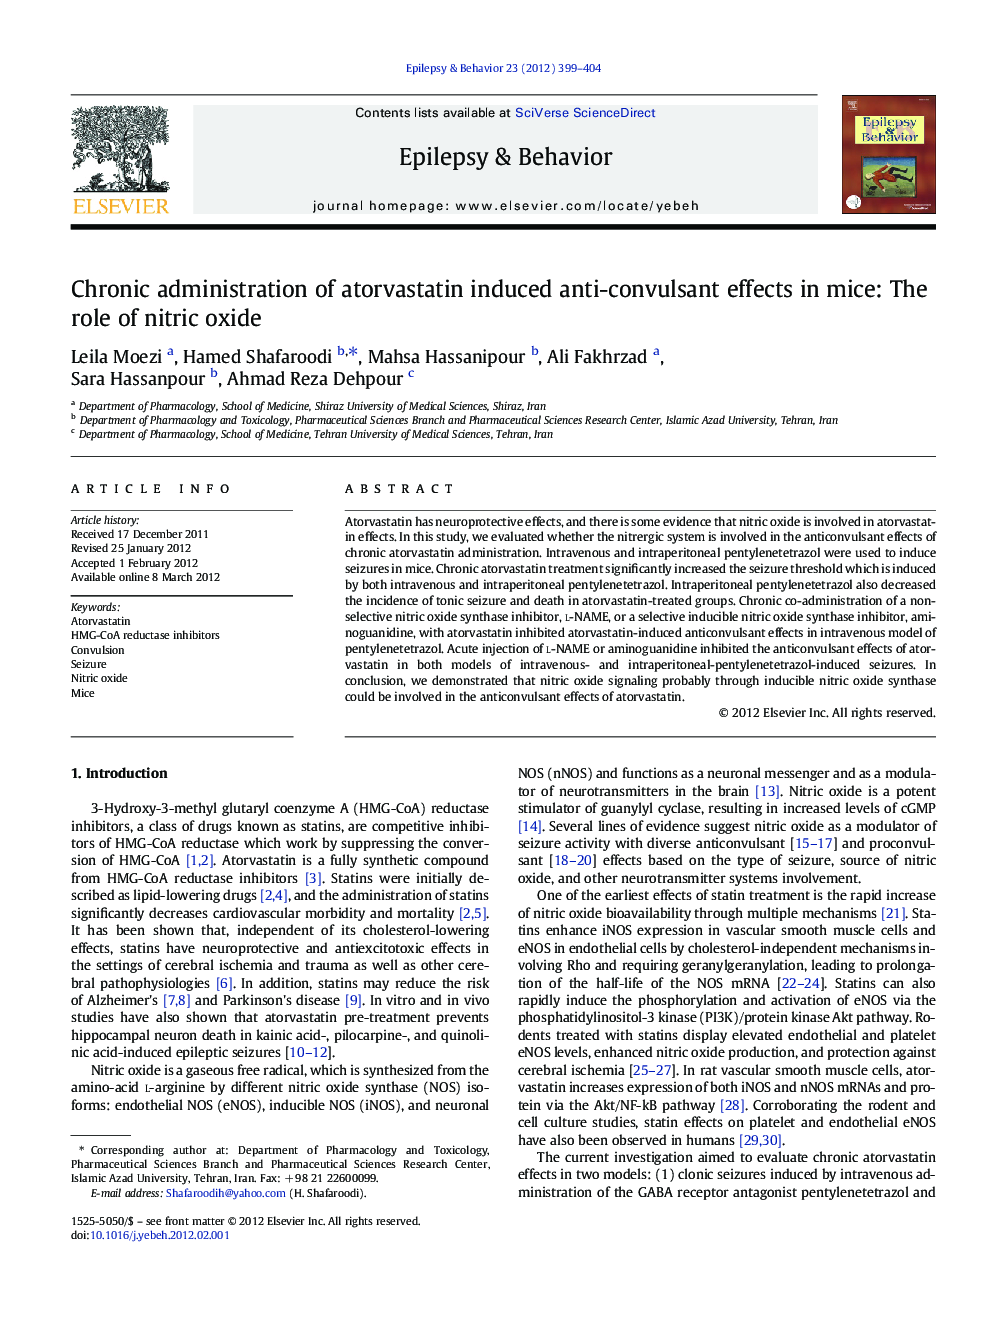 Chronic administration of atorvastatin induced anti-convulsant effects in mice: The role of nitric oxide